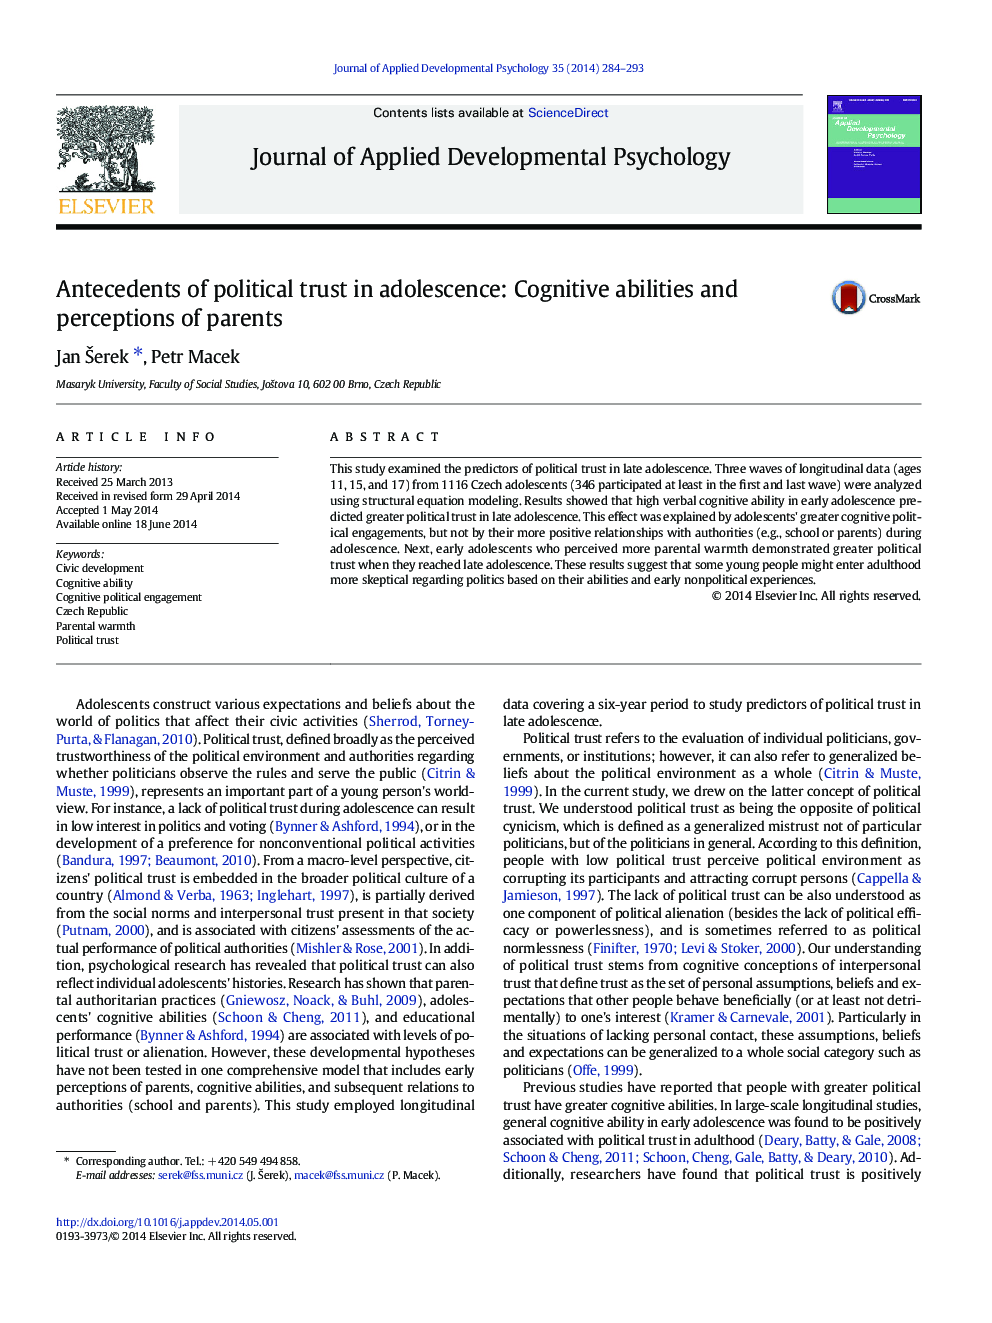 Antecedents of political trust in adolescence: Cognitive abilities and perceptions of parents